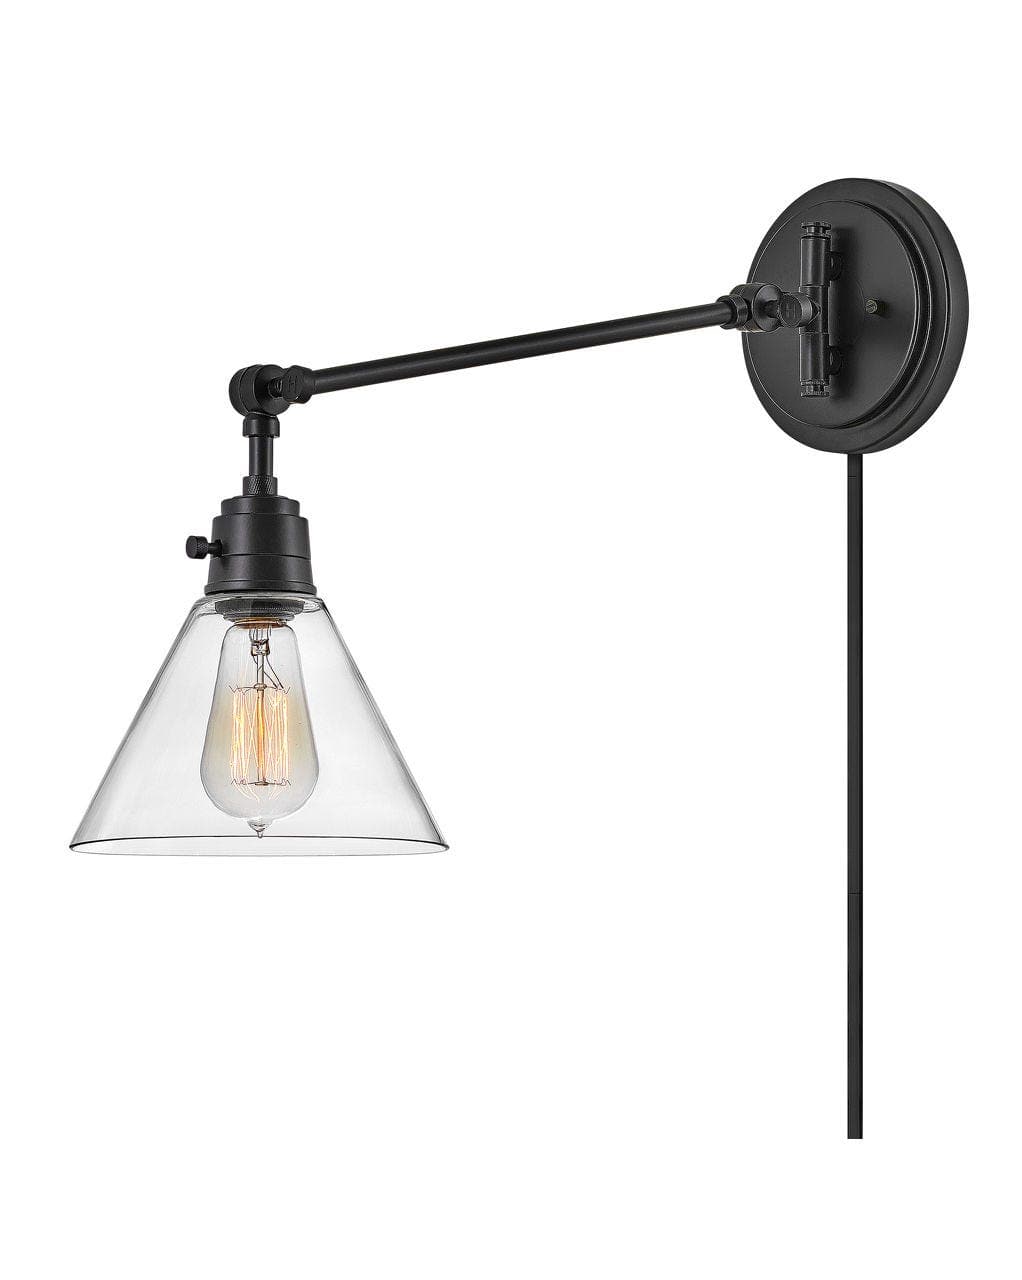 Arti Small Single Light Sconce-Hinkley Lighting-HINKLEY-3690BK-CL-Wall SconcesNON-LED-Black with Clear glass-3-France and Son